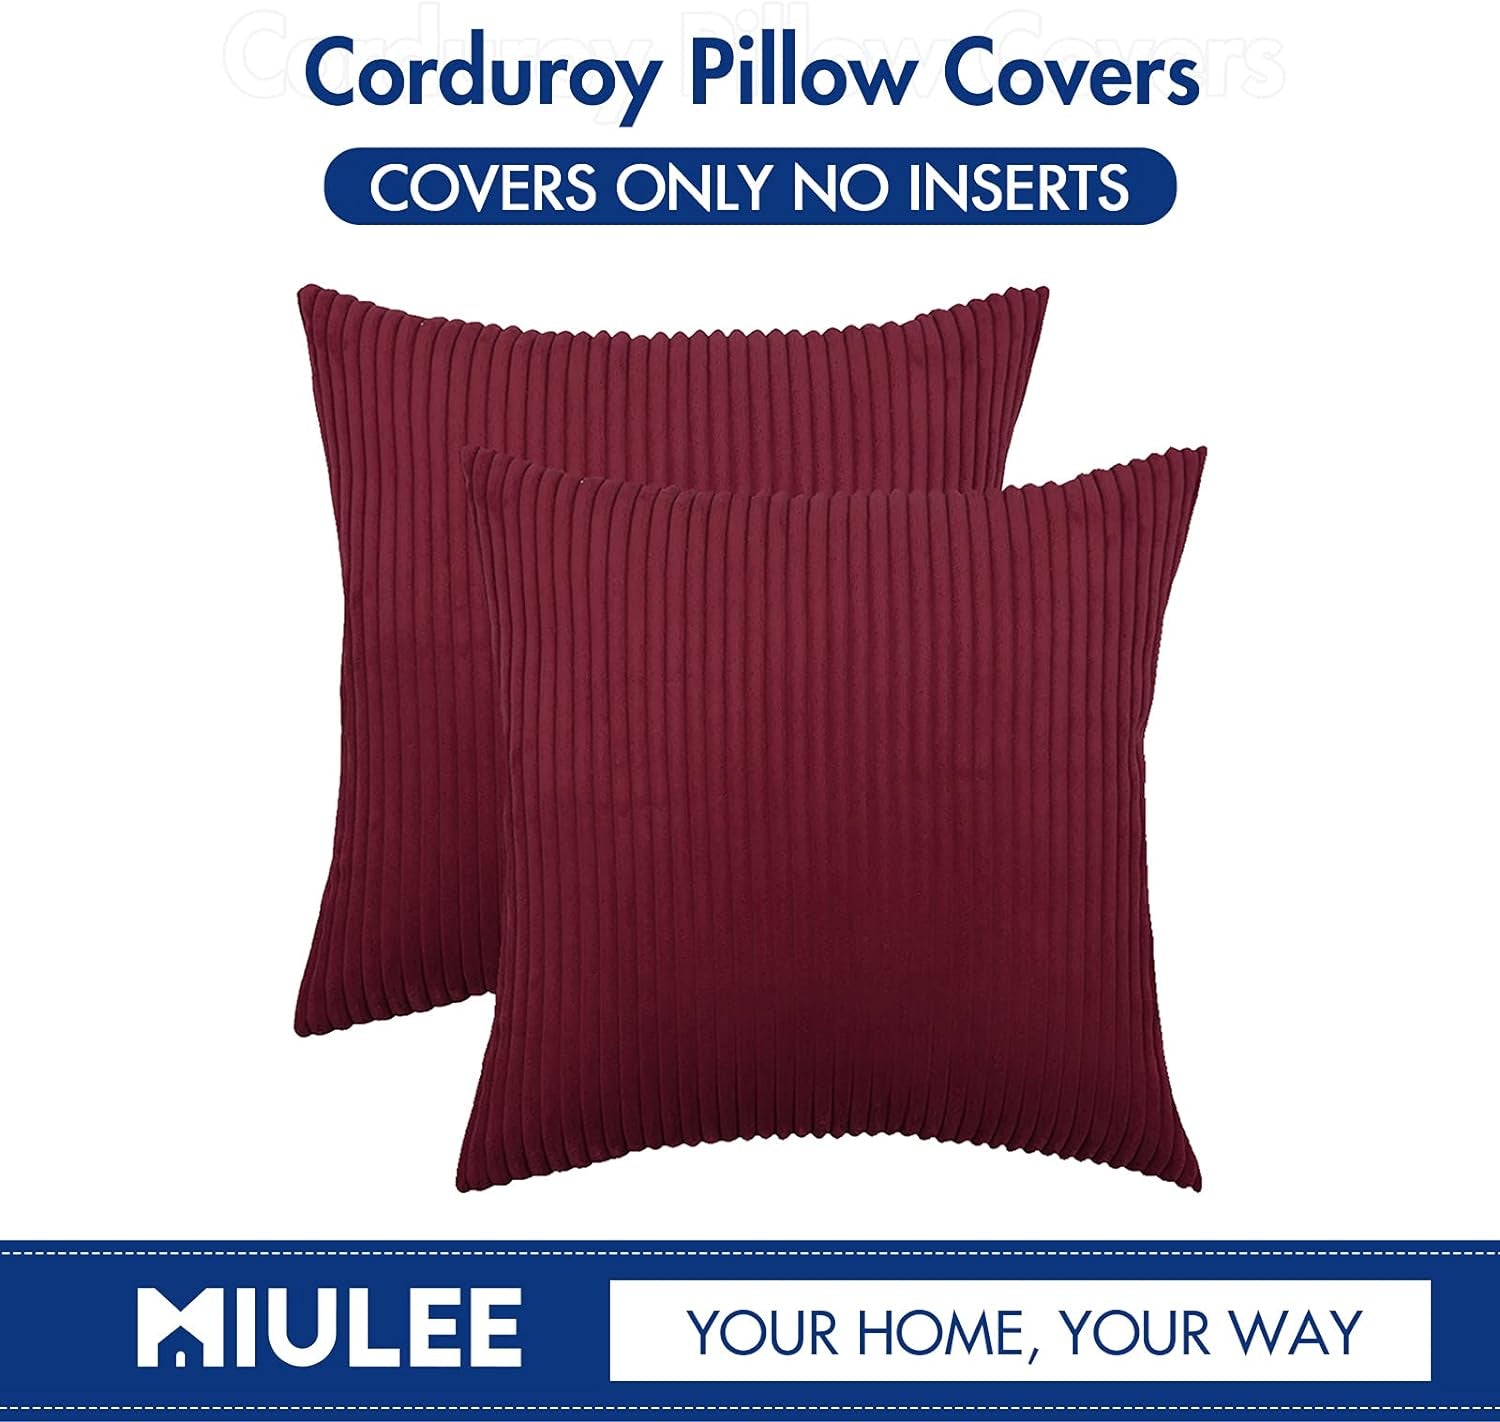 Pack of 2 Corduroy Soft Soild Decorative Square Throw Pillow Covers Cushion Cases Pillow Cases for Couch Sofa Bedroom Car 18 X 18 Inch 45 X 45 Cm Burgundy